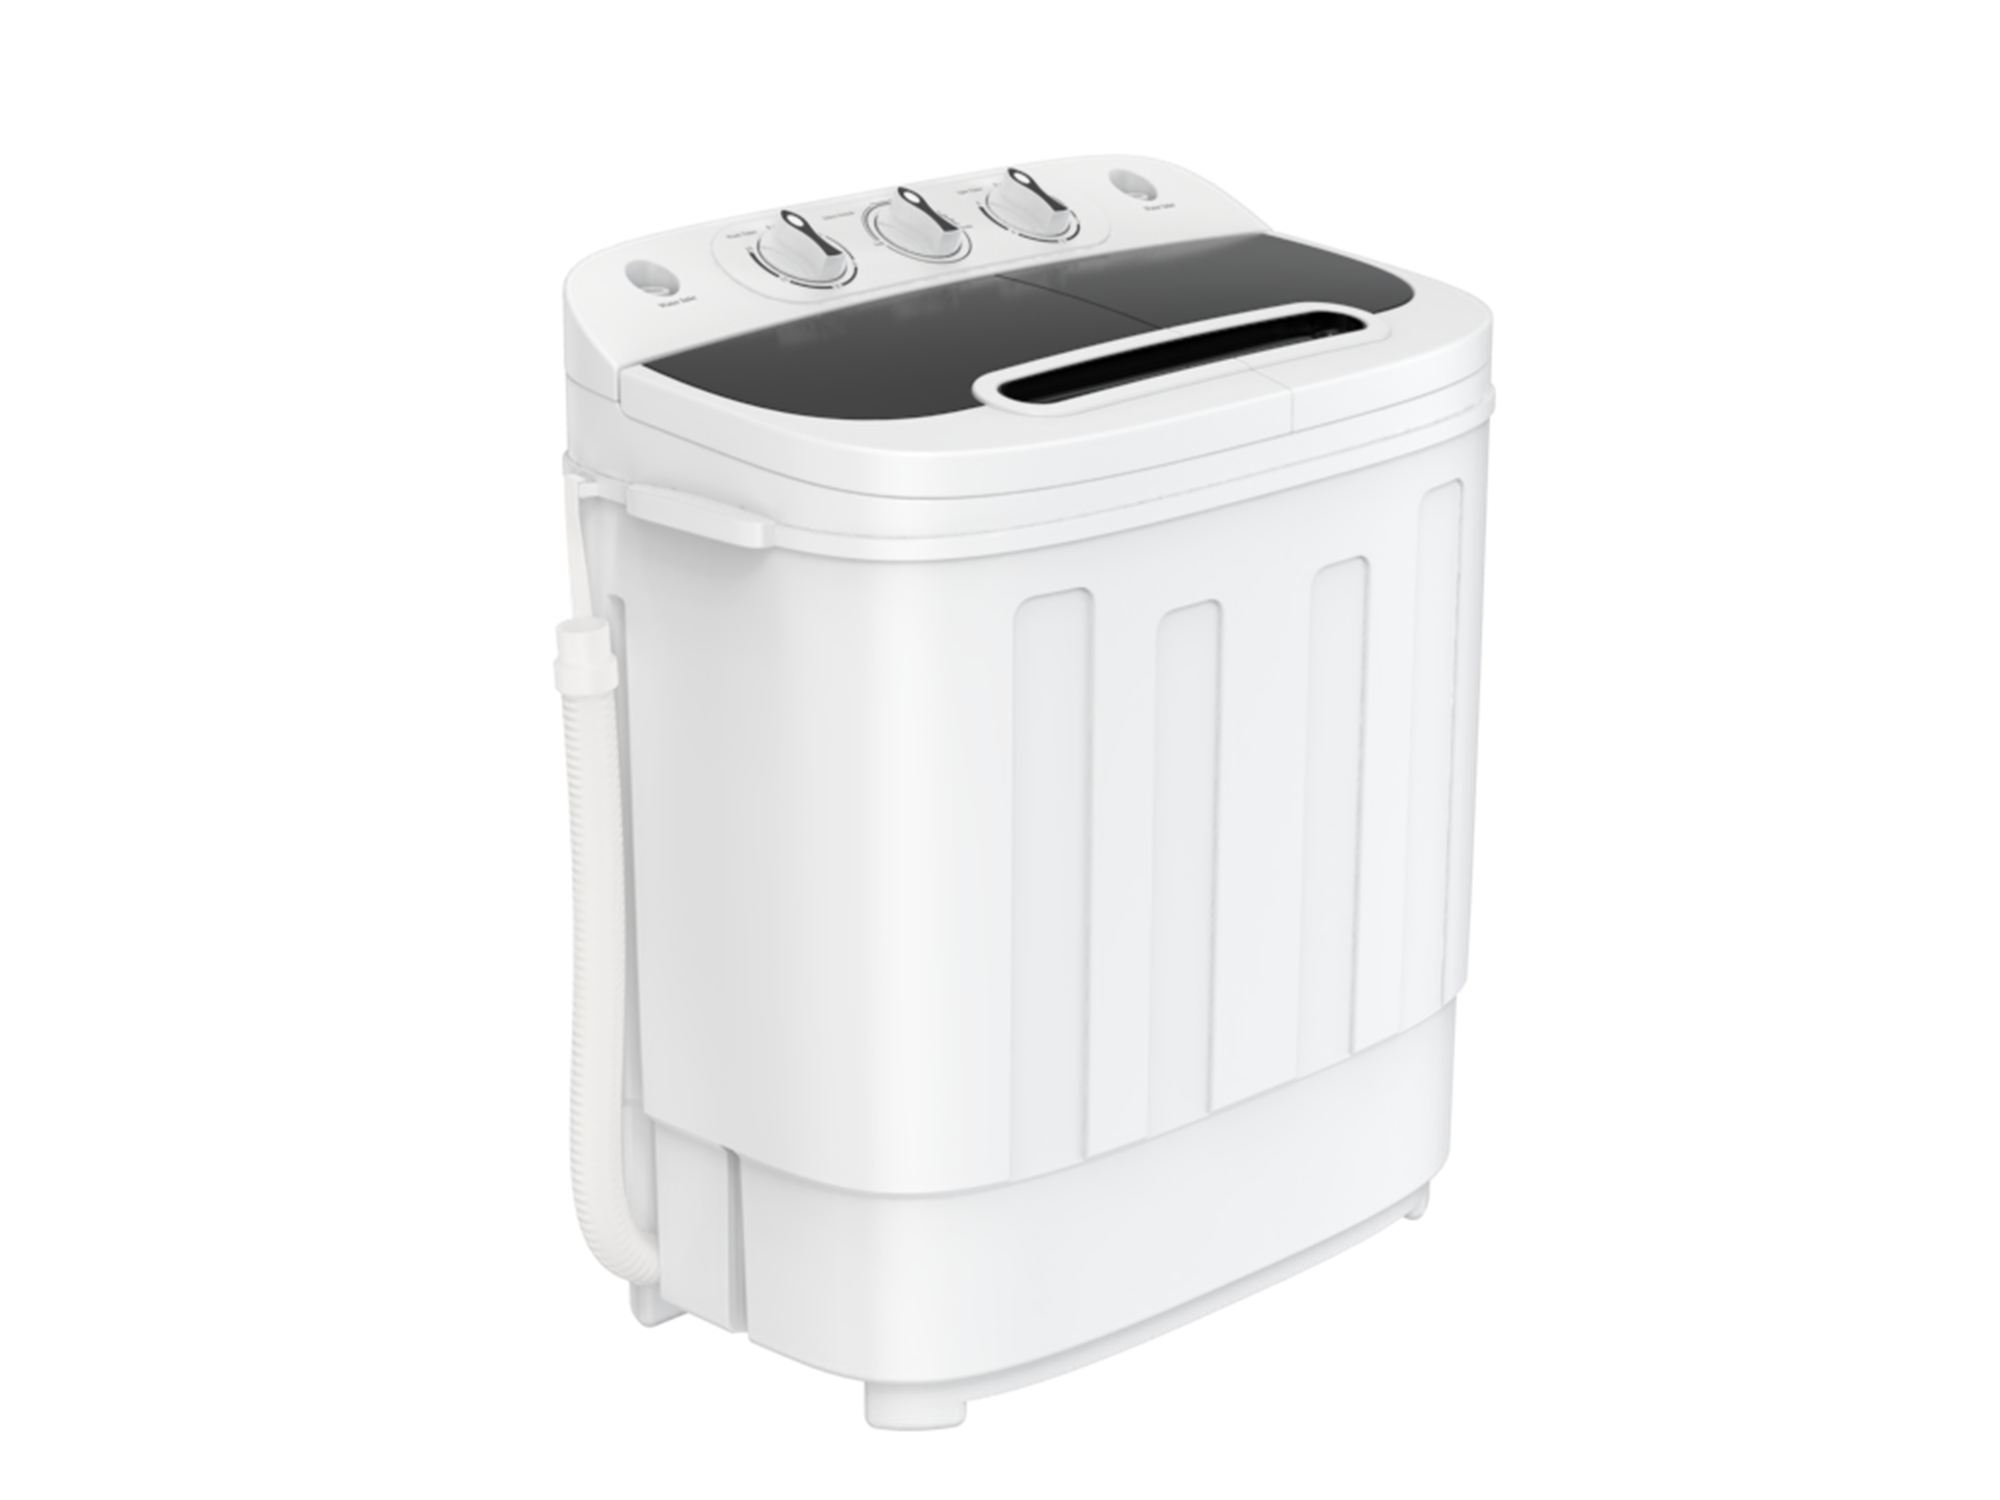 ZENY Mini Twin Tub Portable Compact Washing Machine Washer Spin Dry Cycle  13lbs Capacity｜TikTok Search